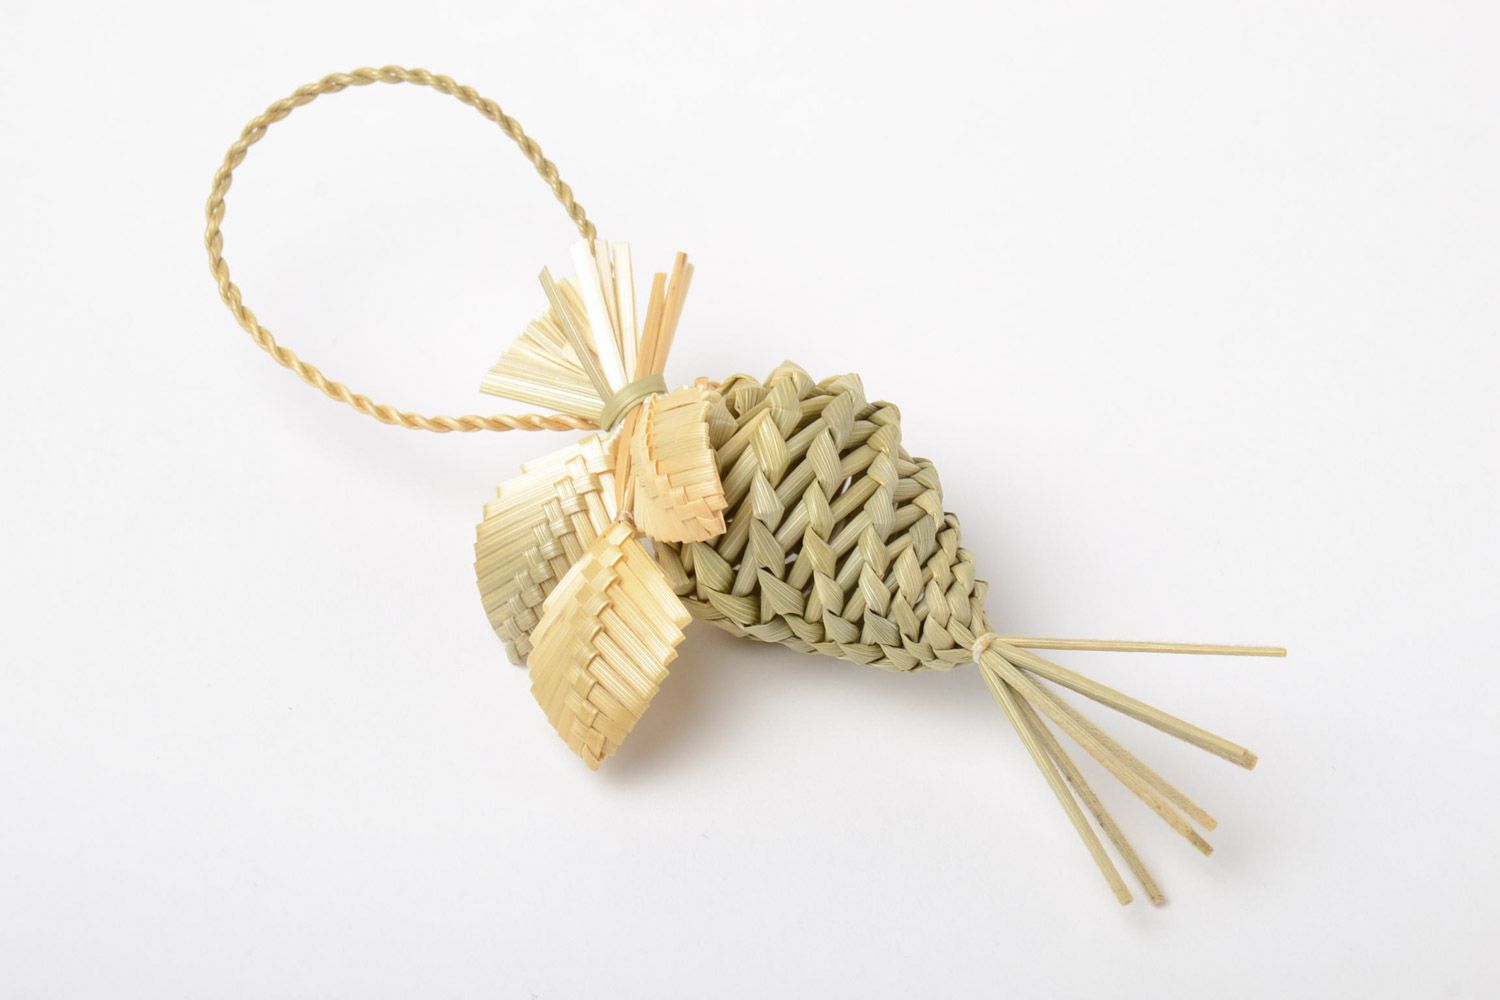 Handmade interior decorative wall hanging woven of straw in the shape of cone photo 2